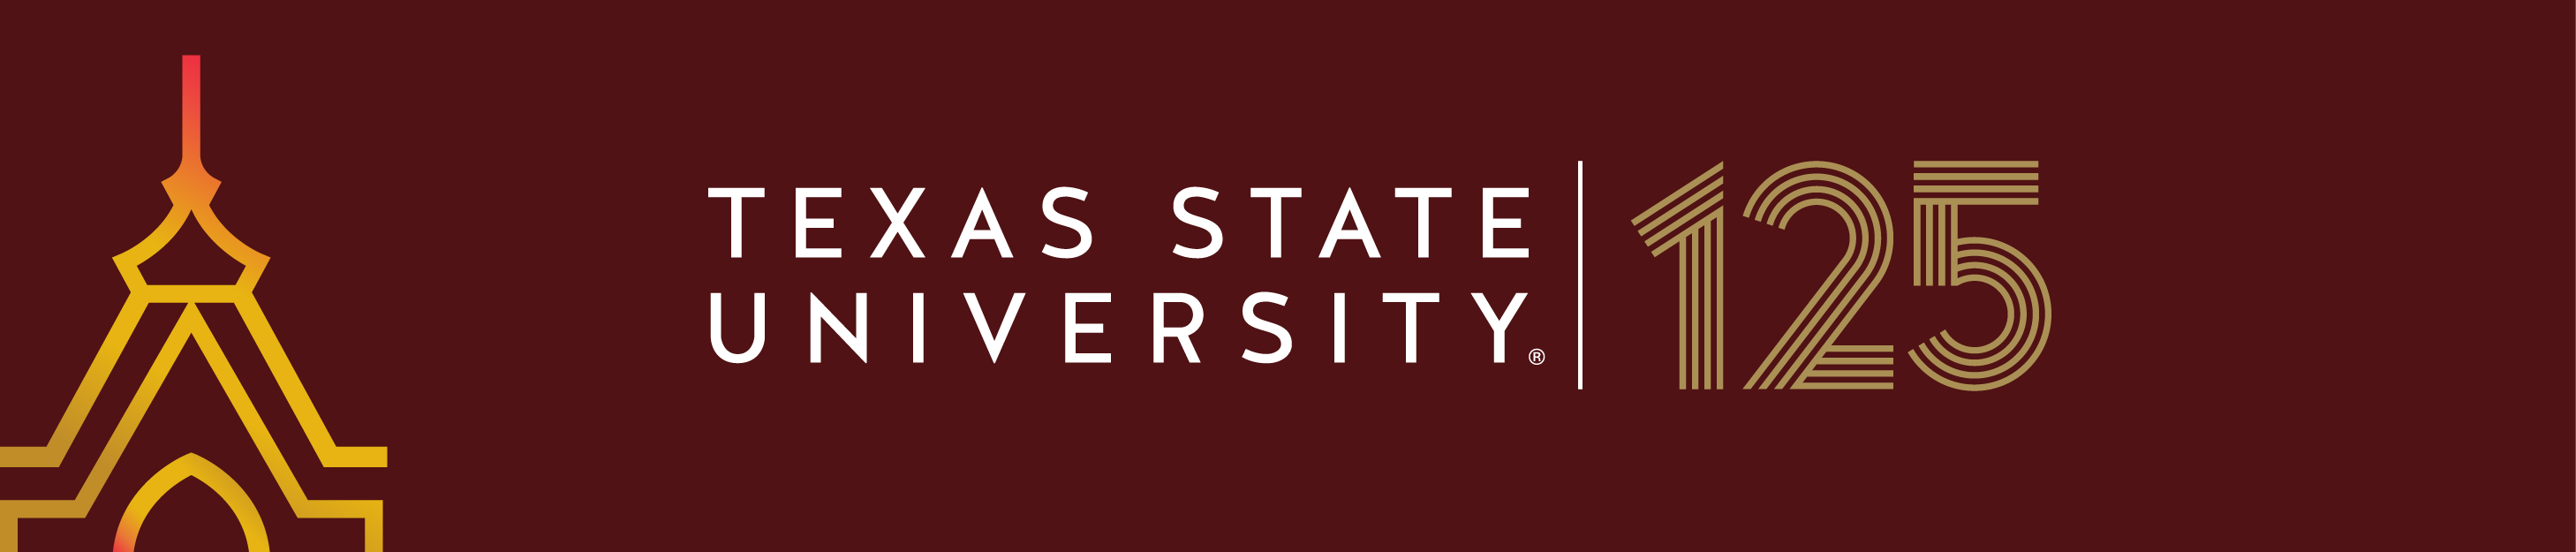 graphic reading TEXAS STATE UNIVERSITY 125 on maroon background